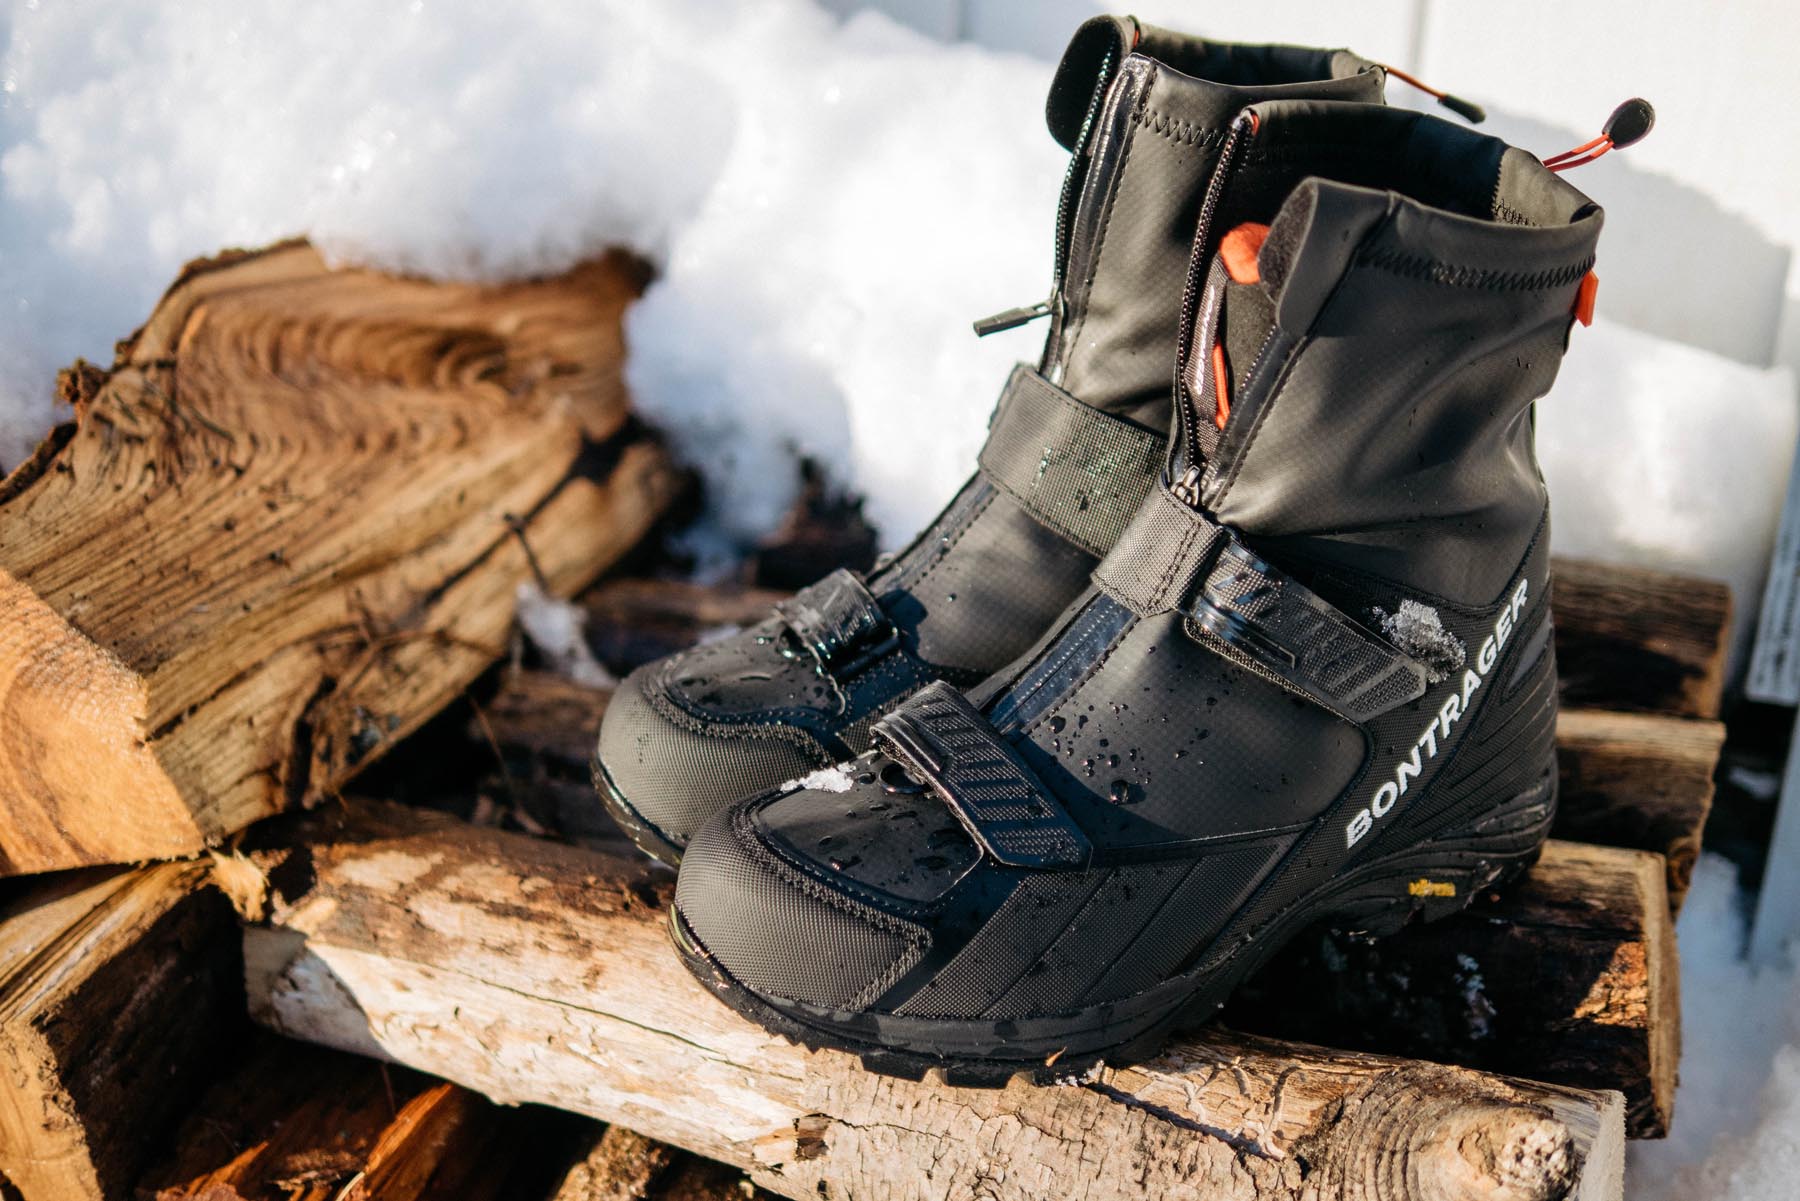 Bontrager OMW Review, Old Man Winter boot